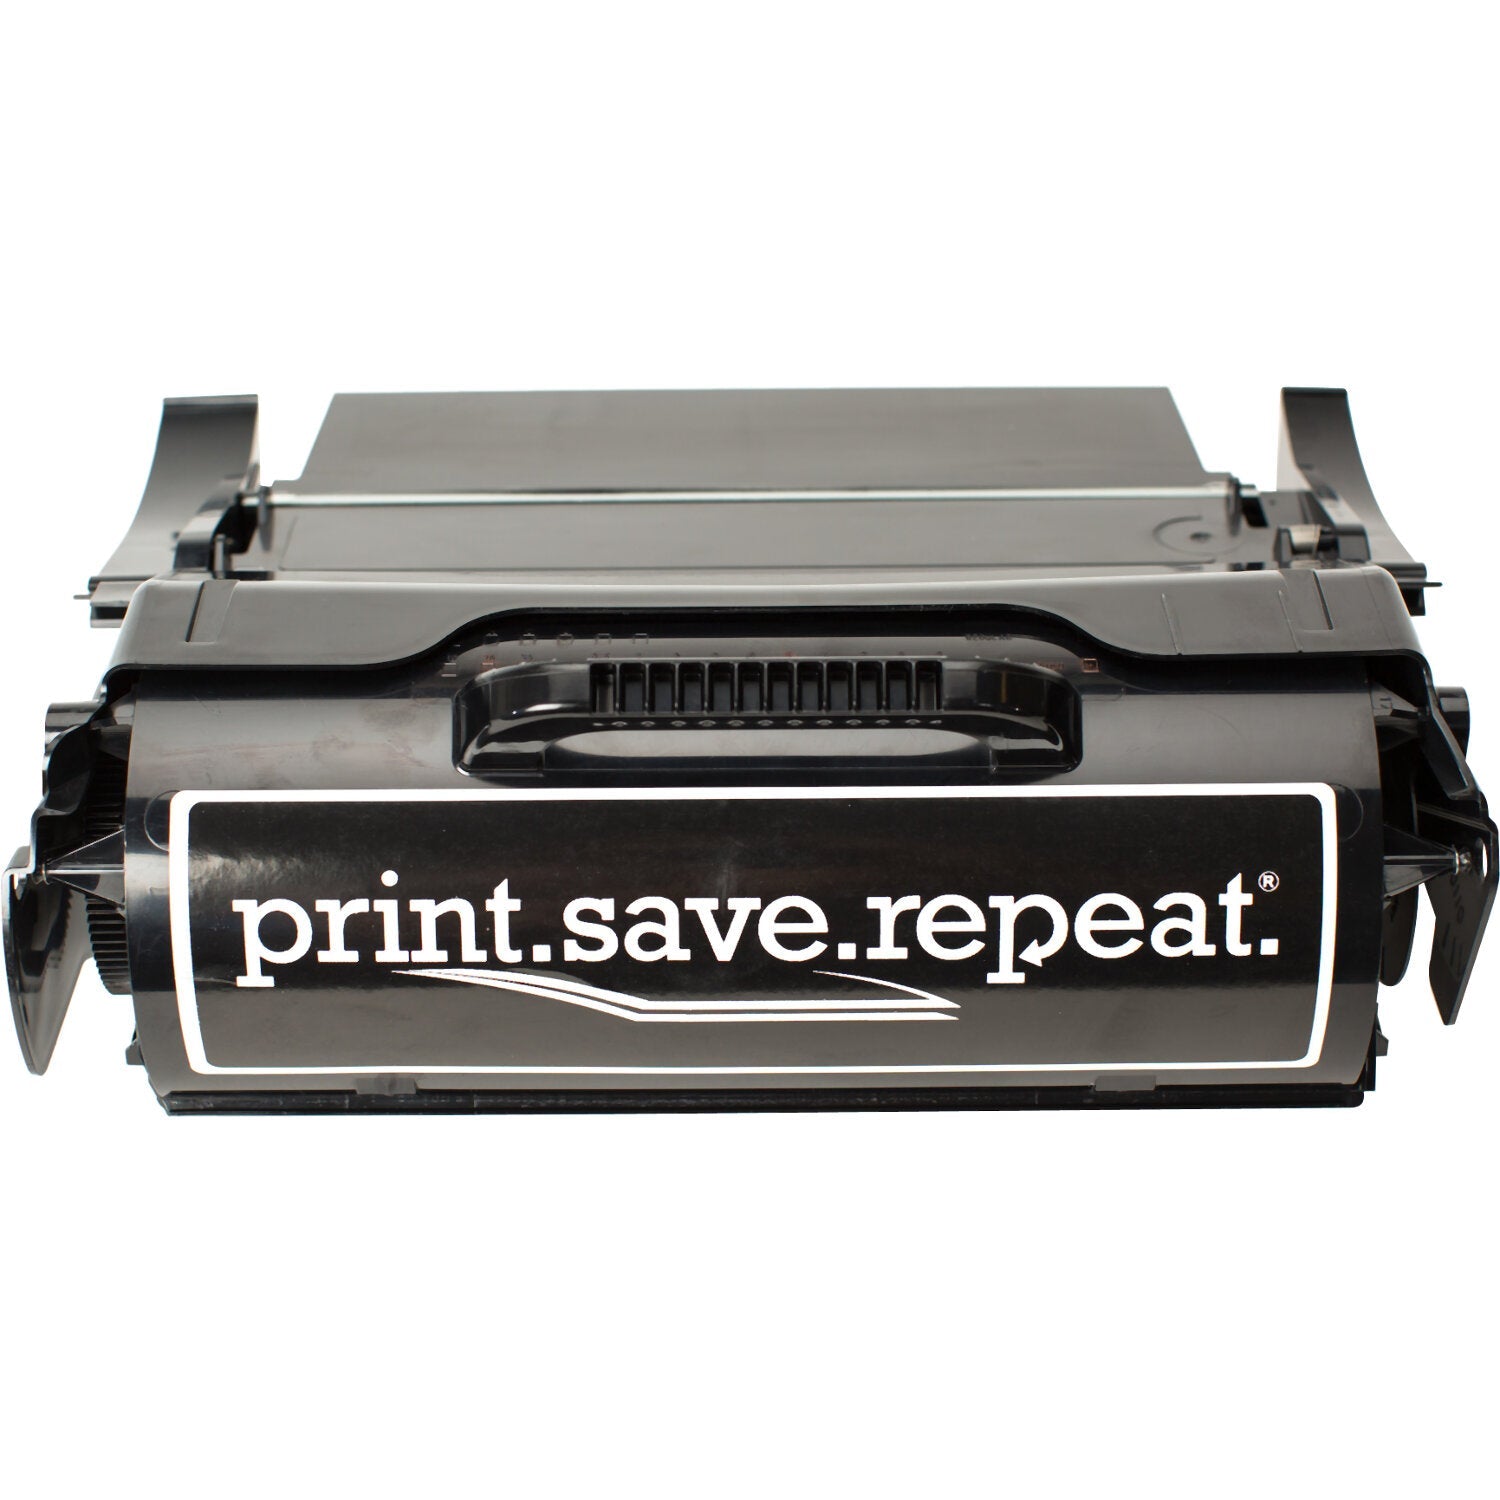 Print.Save.Repeat. Lexmark X651A41G Remanufactured Toner Cartridge for X651, X652, X654, X656, X658 [7,000 Pages]